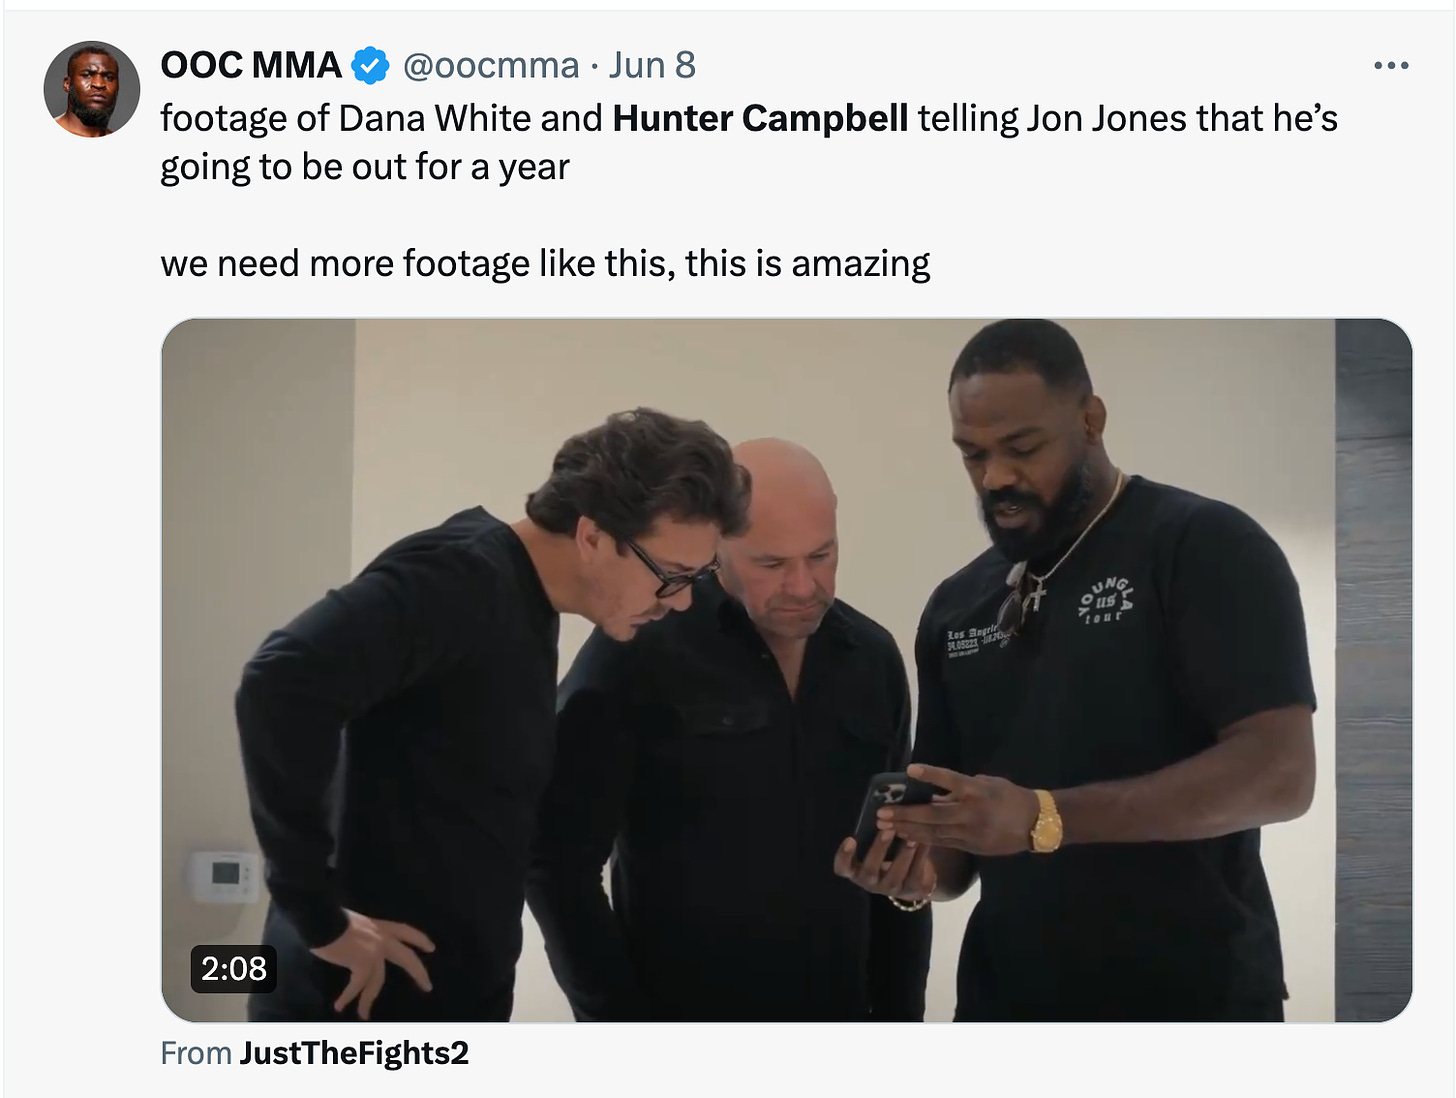 footage of Dana White and Hunter Campbell telling Jon Jones that he’s going to be out for a year  we need more footage like this, this is amazing